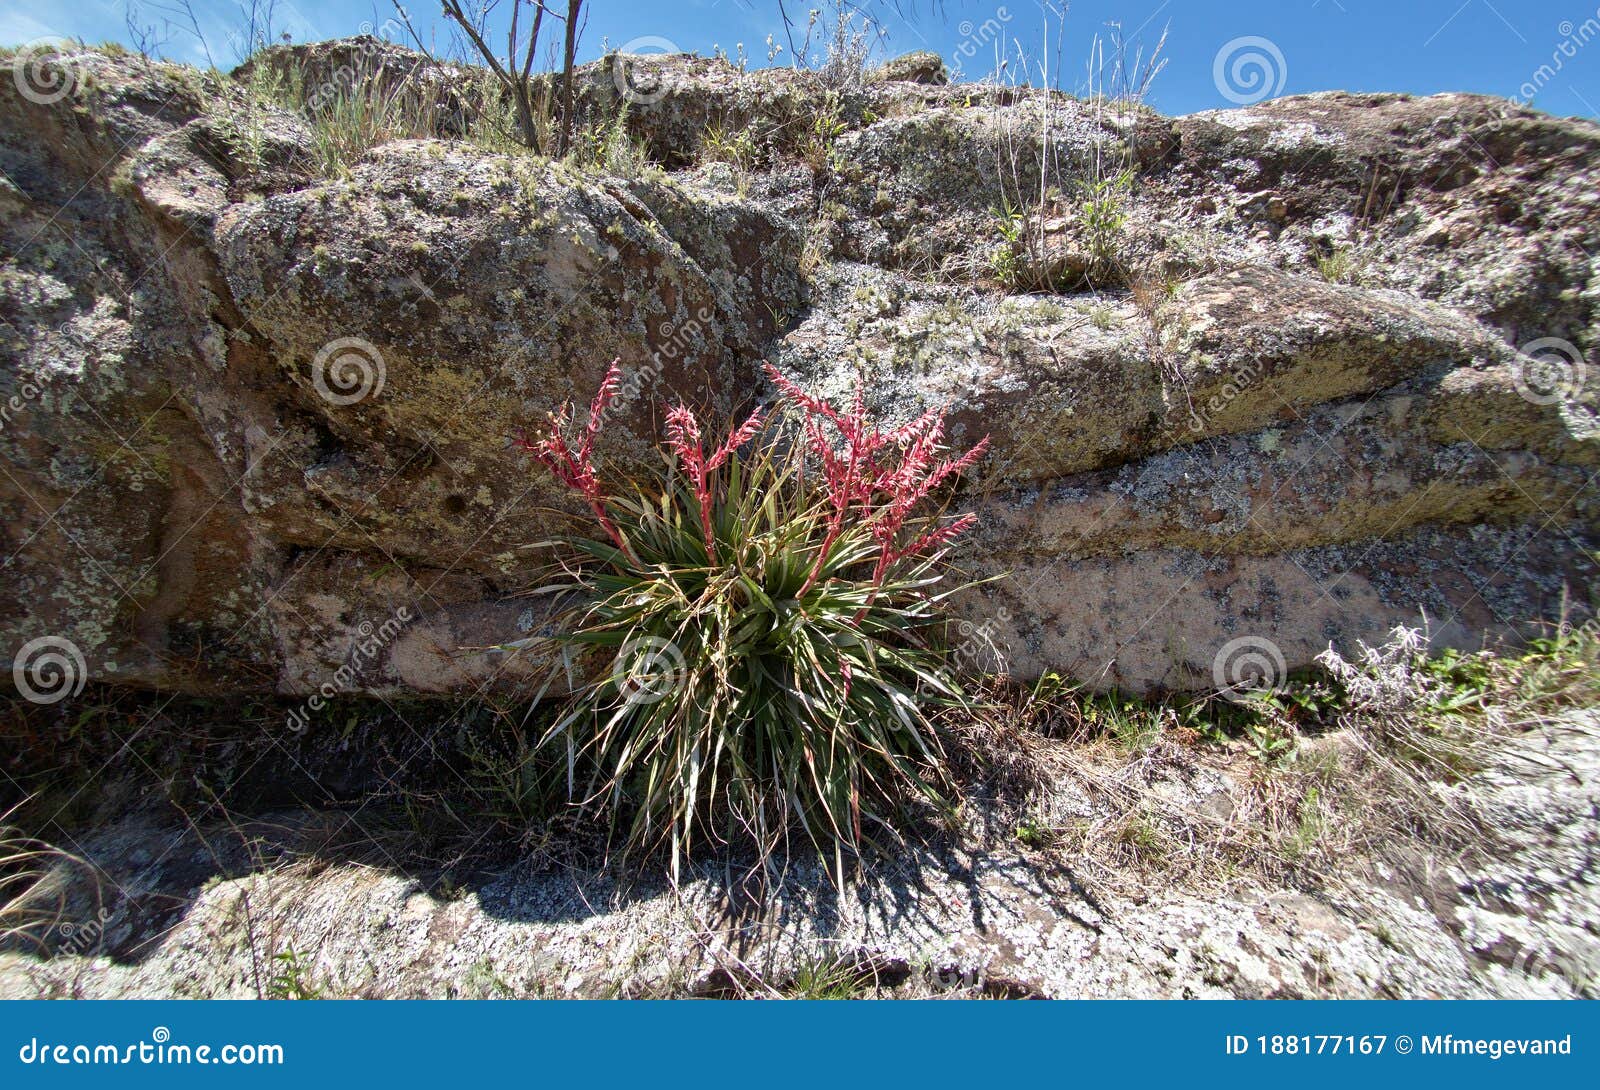 plant with red flowers at cerro blanco reserve